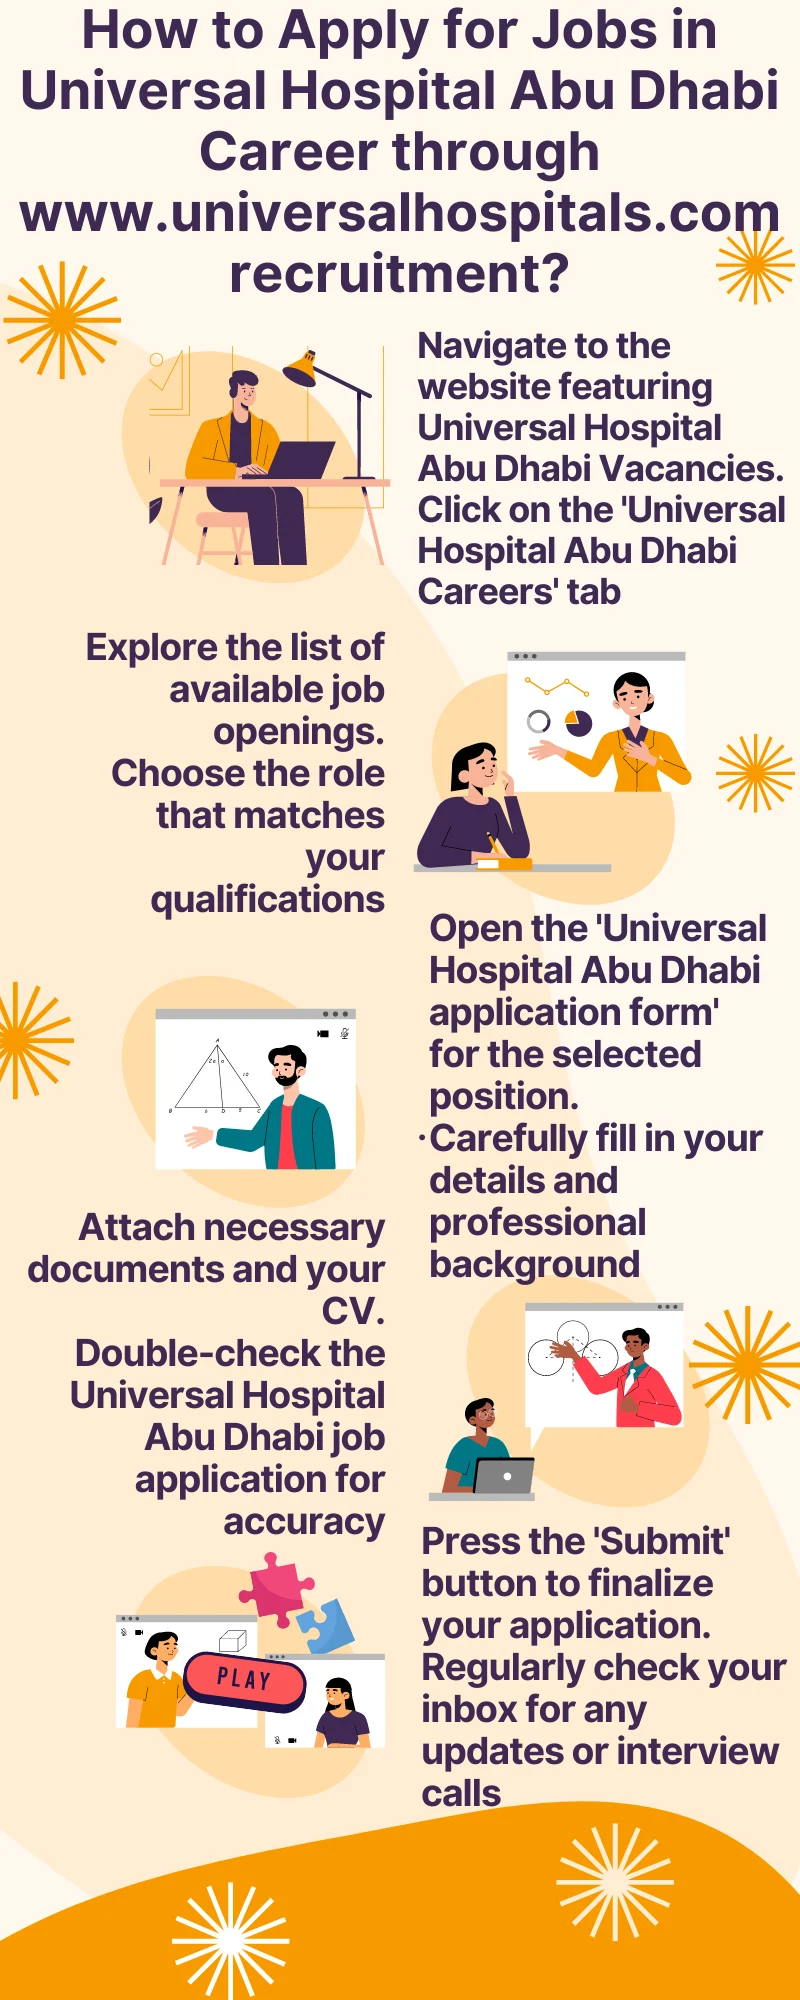 How to Apply for Jobs in Universal Hospital Abu Dhabi Career through www.universalhospitals.com recruitment?